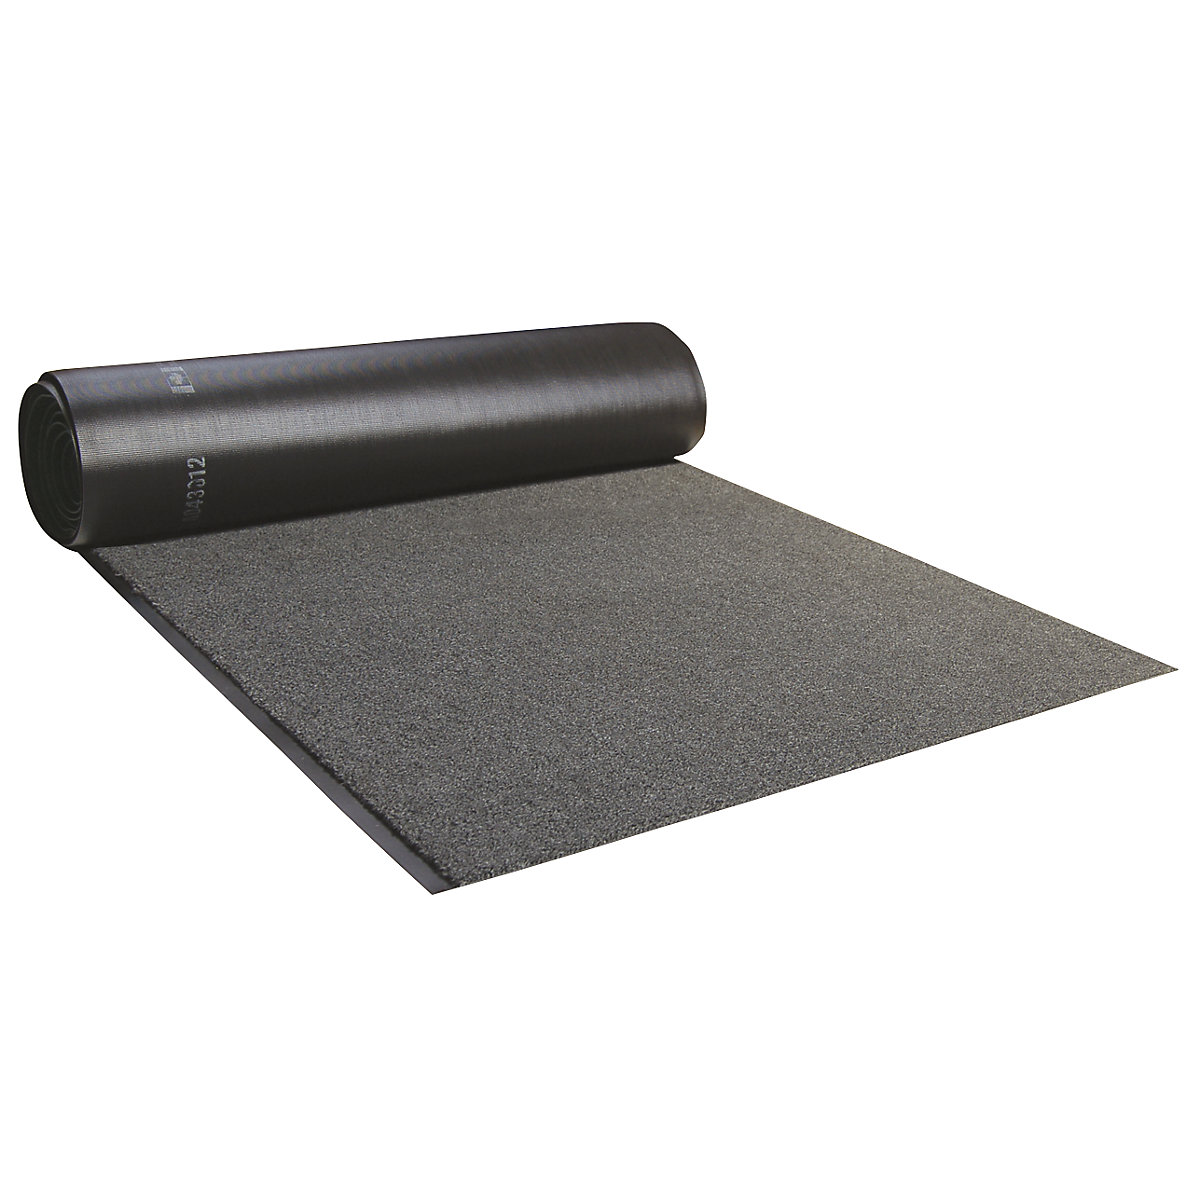 EAZYCARE AQUA entrance matting, width 900 mm, sold by the metre, grey-5